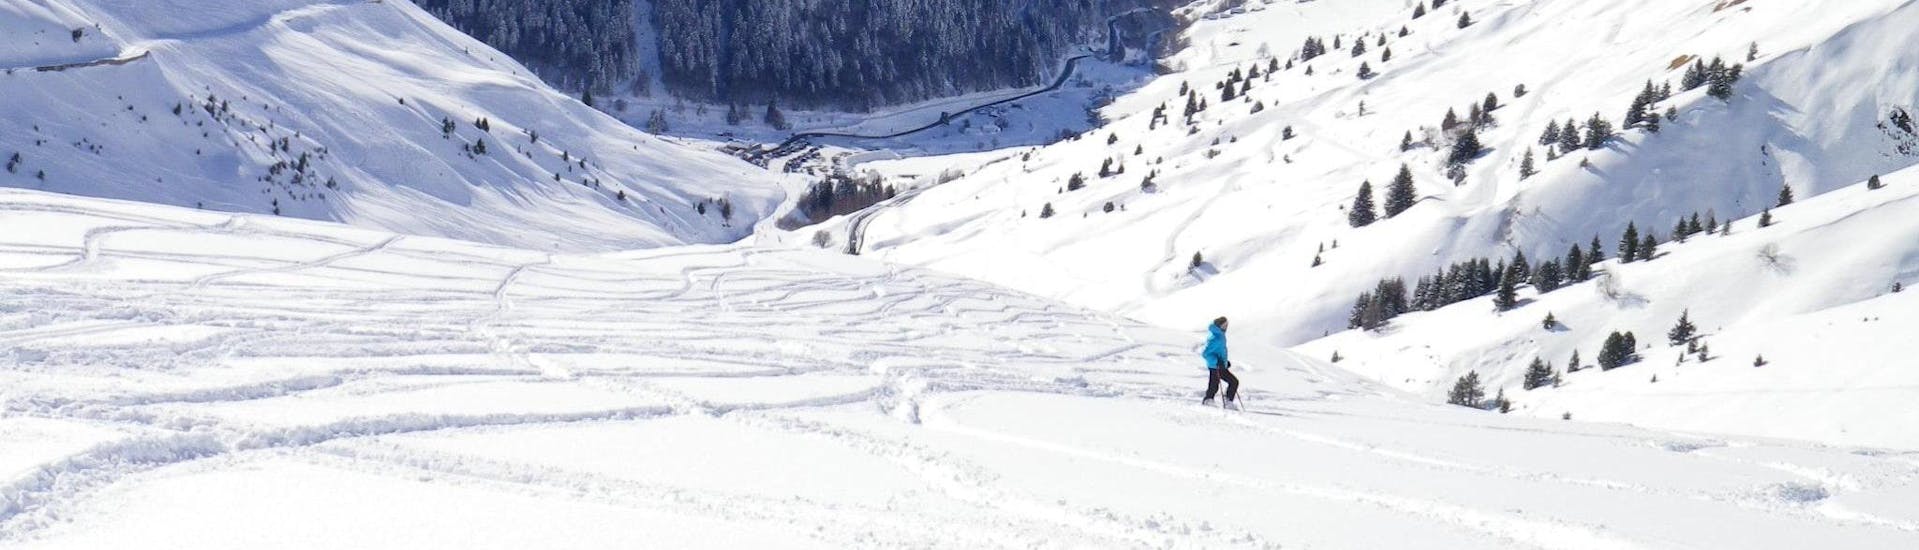 A ski instructor from the ski school ESI Ecoloski Barèges is standing in the middle of the beautiful mountain landscape of Le Grand Tourmalet where Ski Lessons for Adults - All Levels happen.